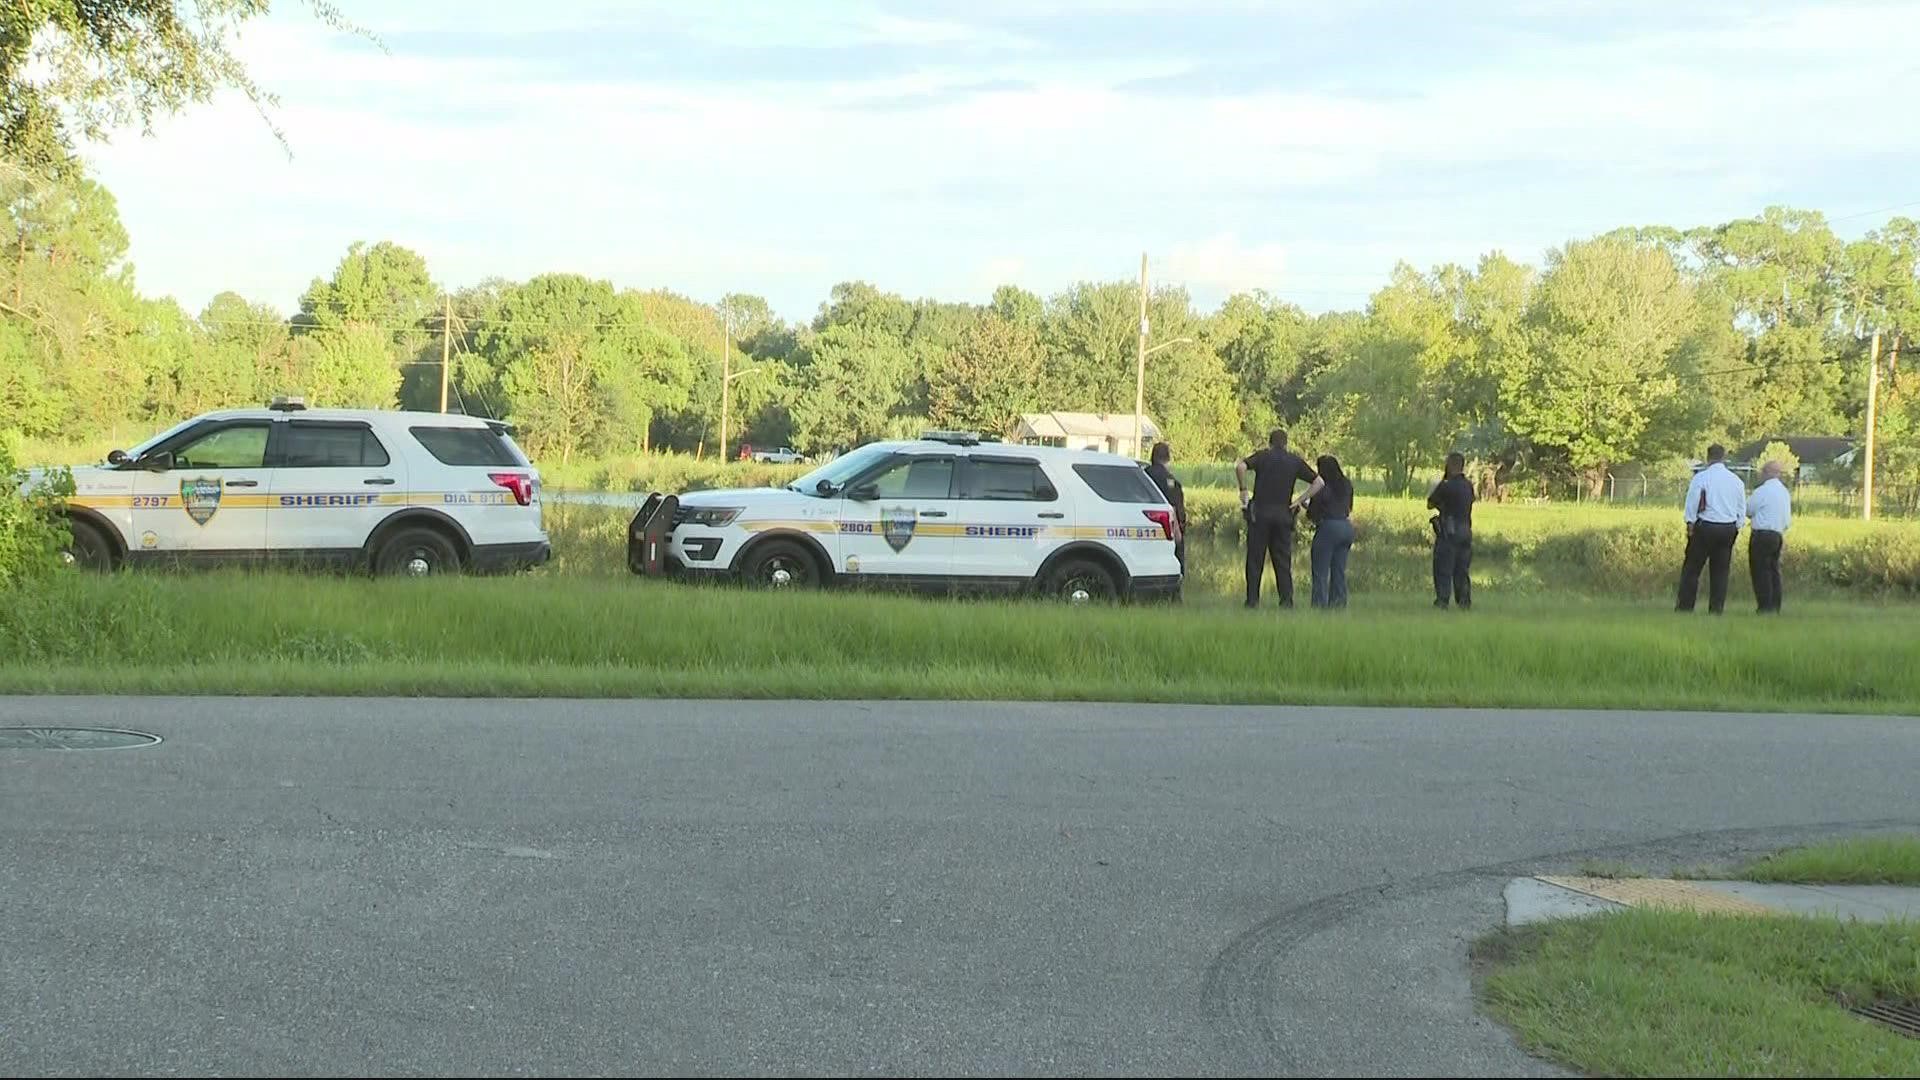 The man was found near the Paxon neighborhood. There was no sign of foul play, according to police.